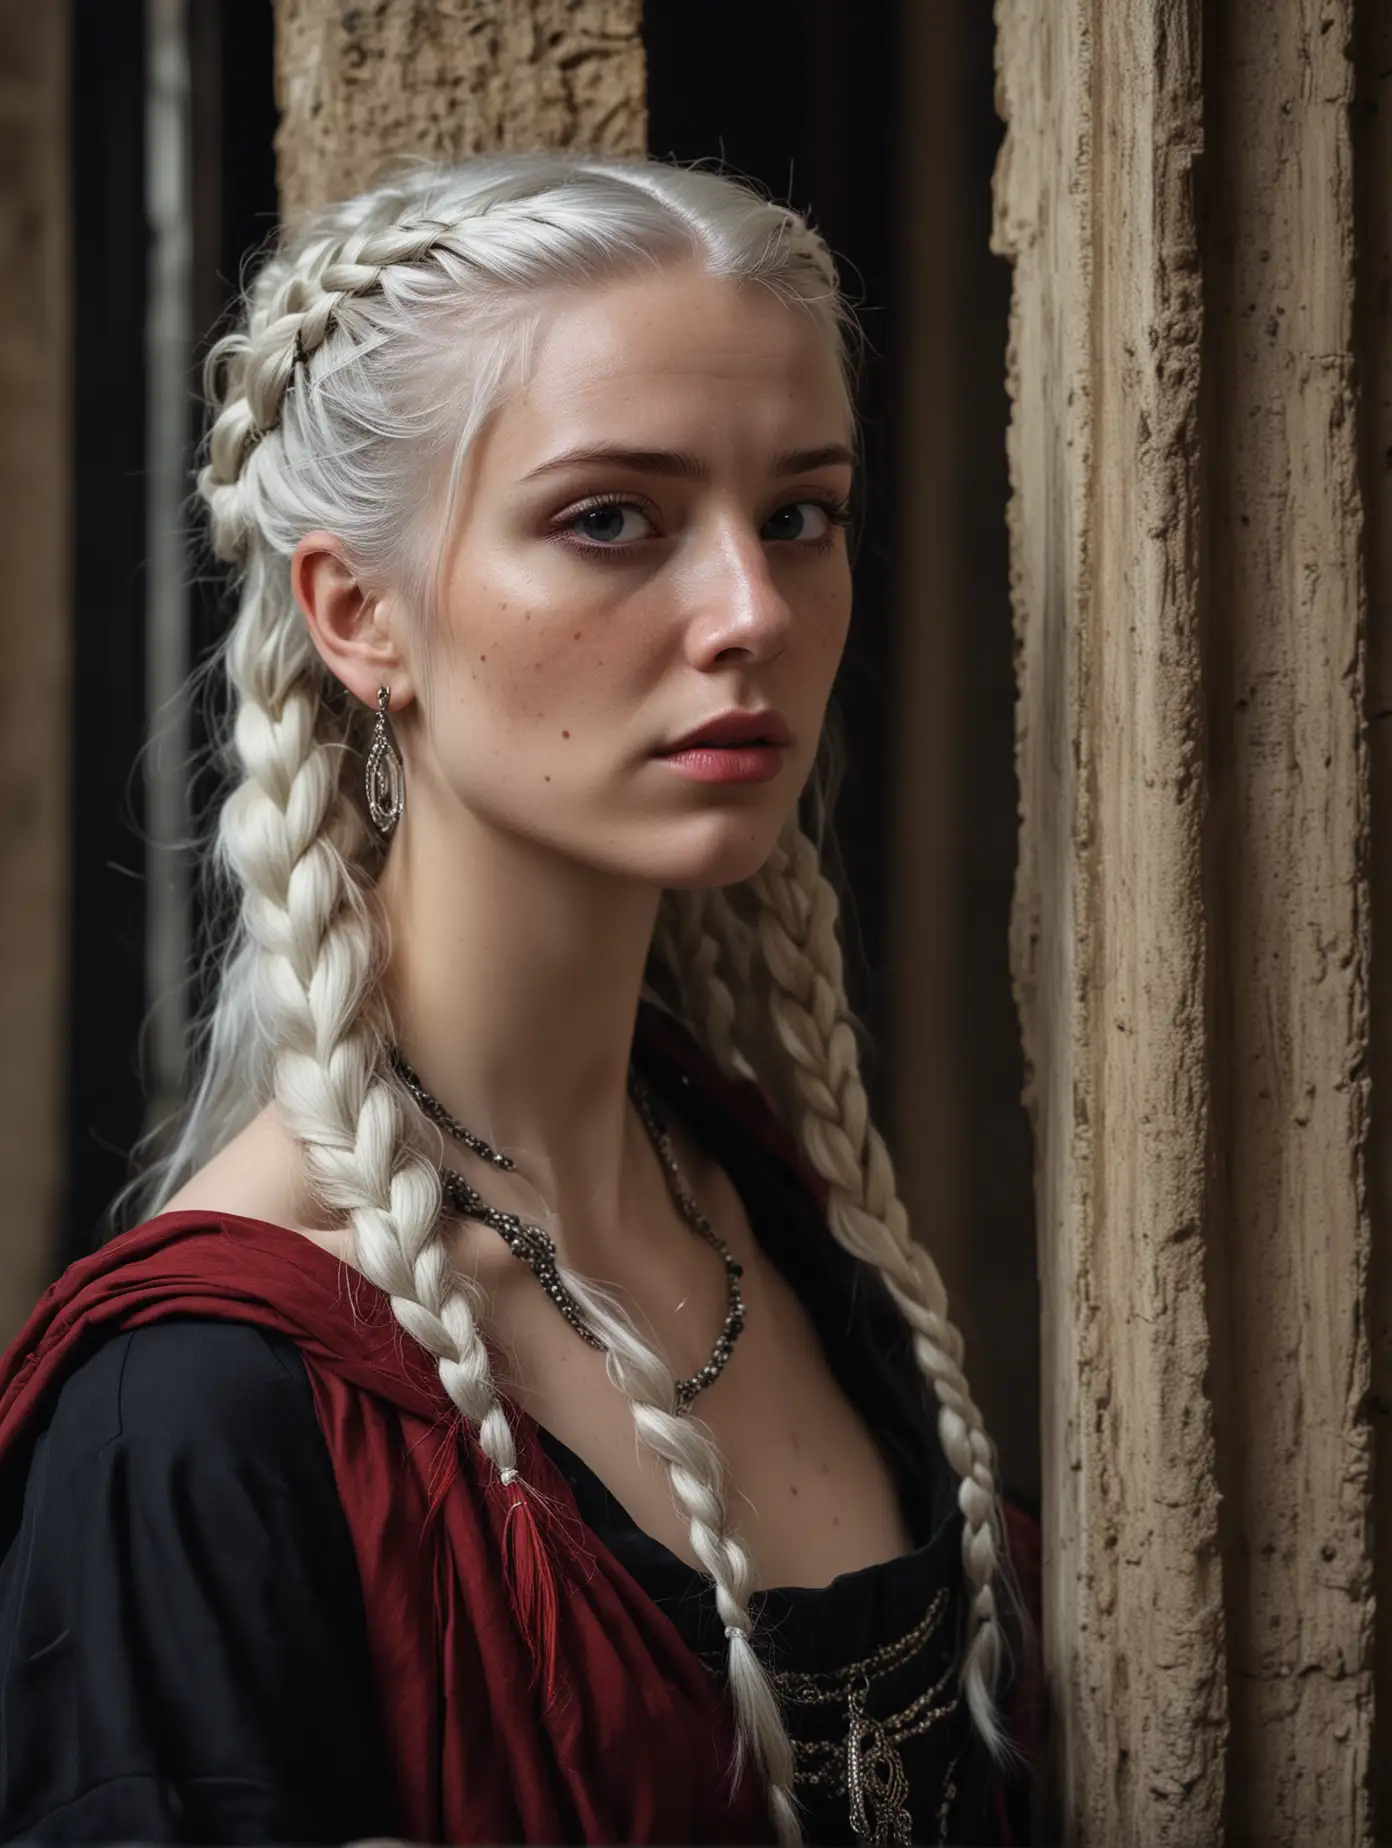 Mysterious Woman with Braided White Hair in Byzantine Setting